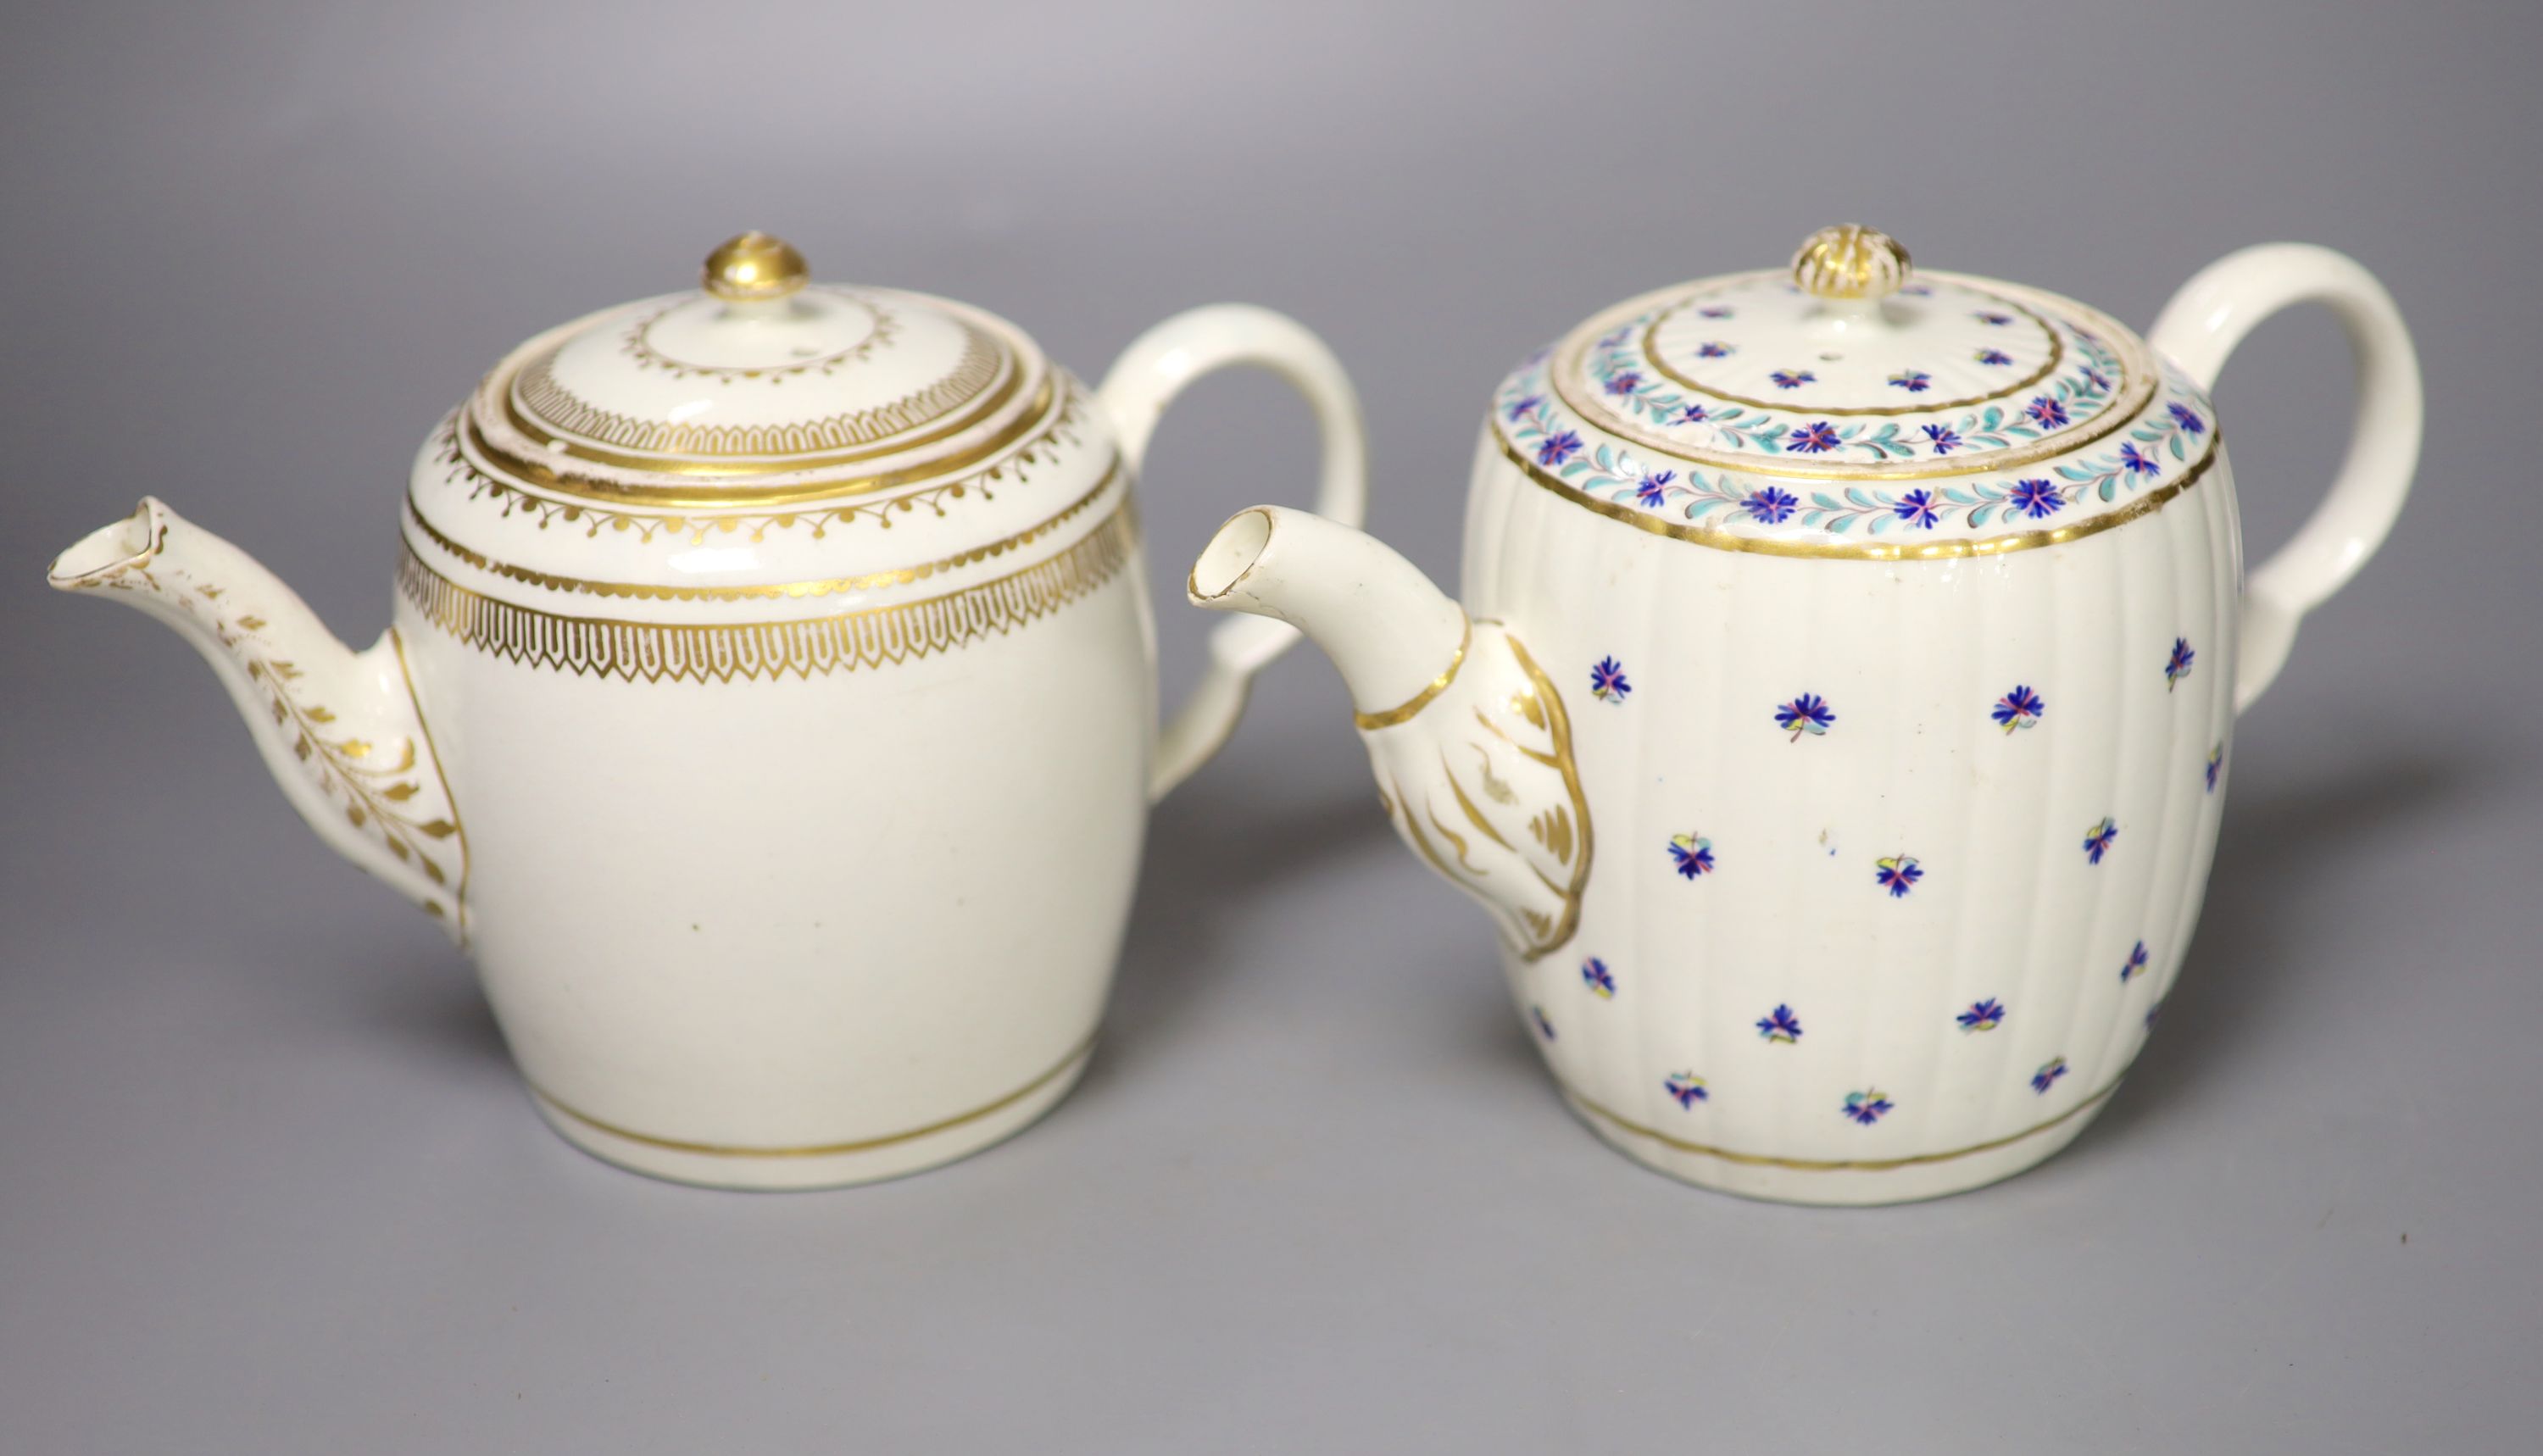 A Caughley teapot and cover, painted with cornflowers and another Caughley teapot and cover with